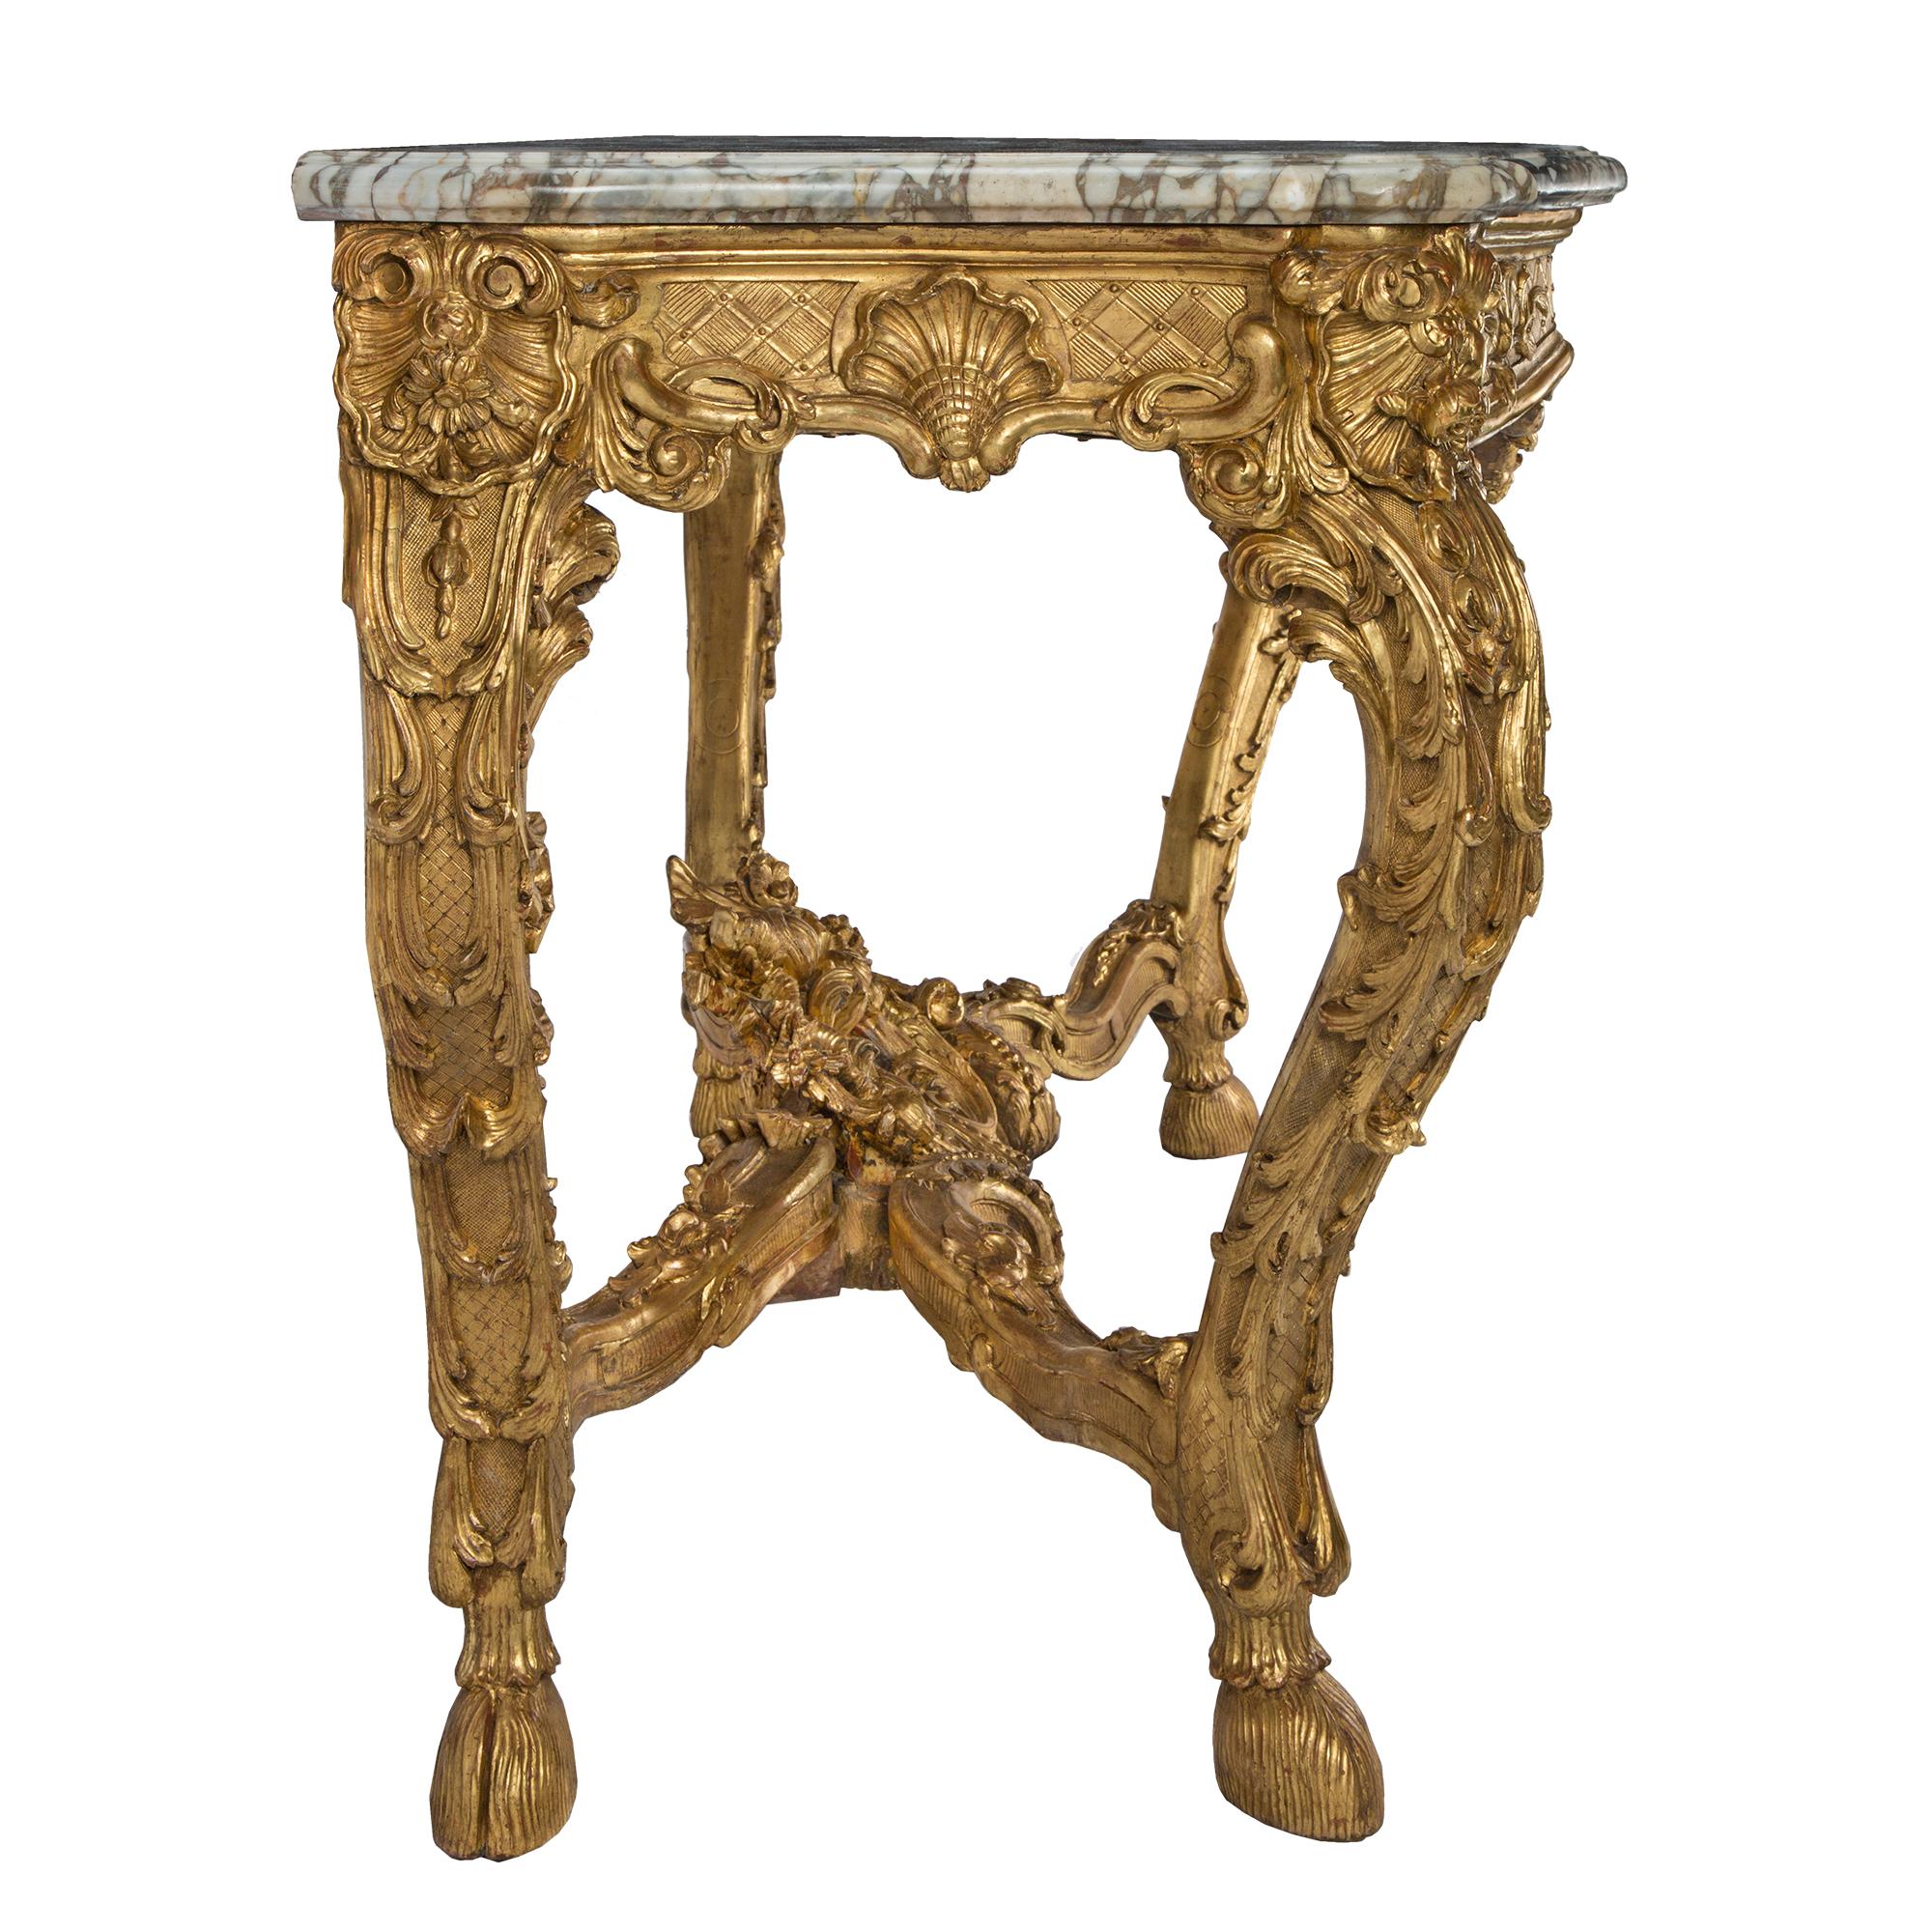 18th Century and Earlier French 18th Century Regence Period Giltwood and Marble Freestanding Console For Sale